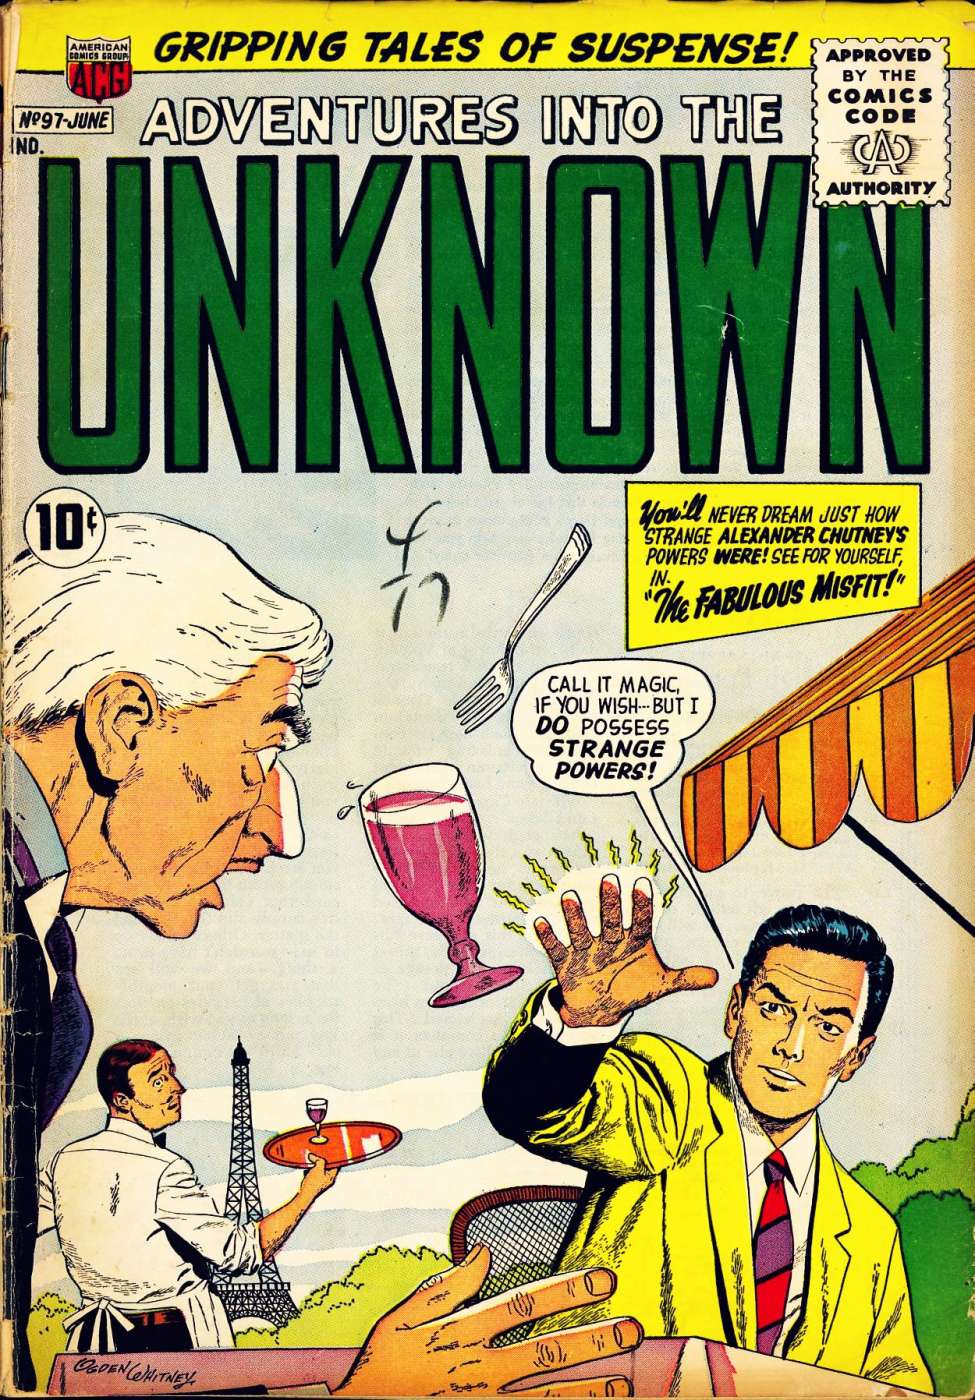 Comic Book Cover For Adventures into the Unknown 97